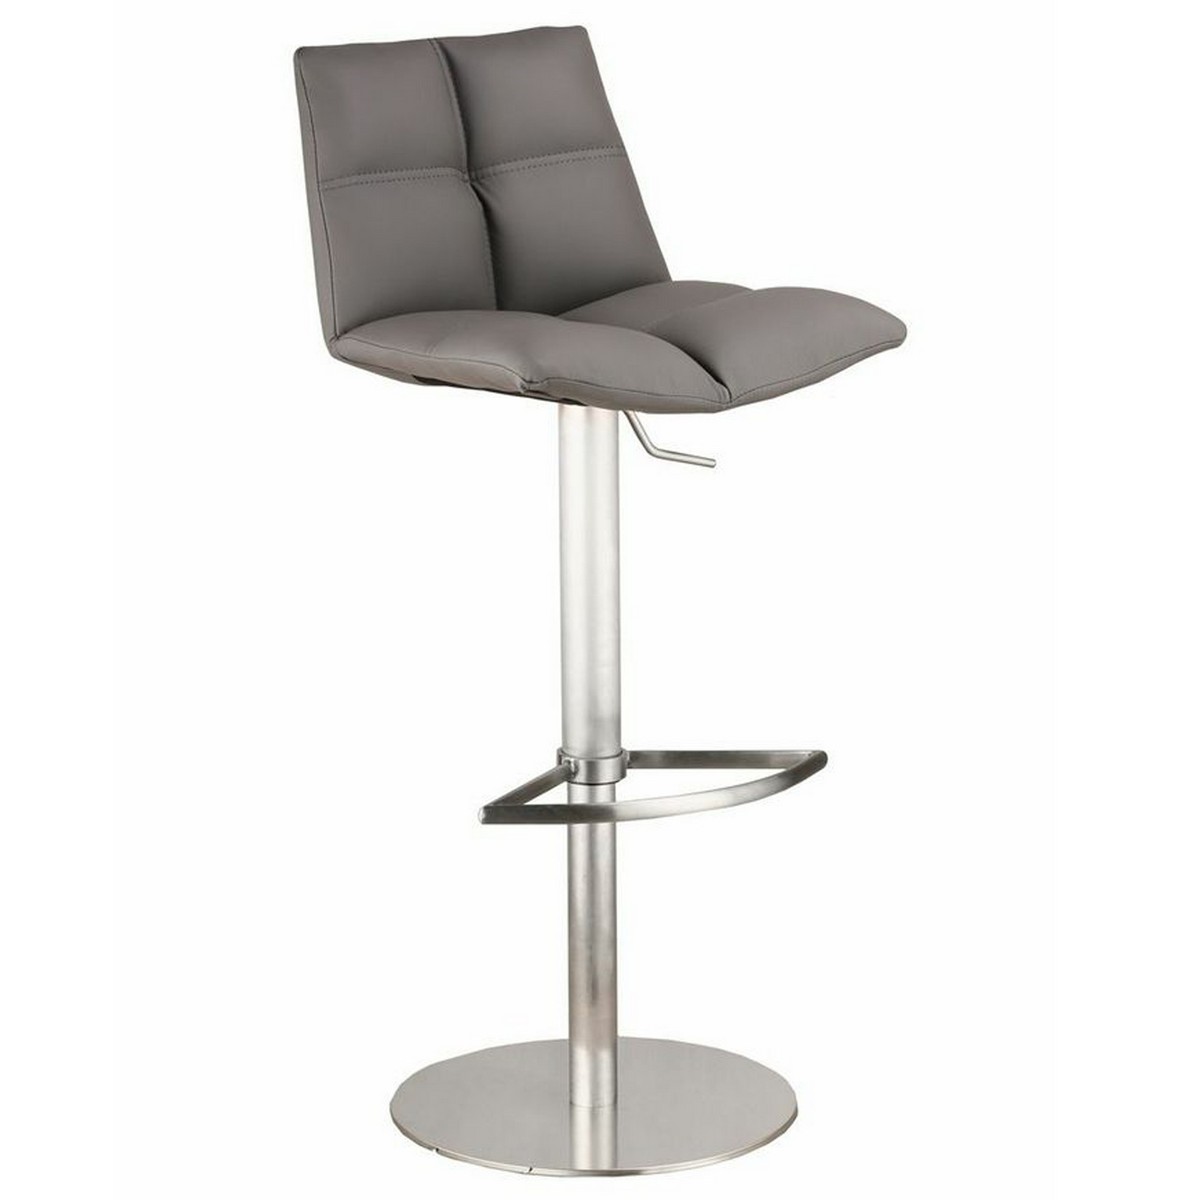 Armen Living Roma Adjustable Brushed Stainless Steel Barstool in Gray Leatherette